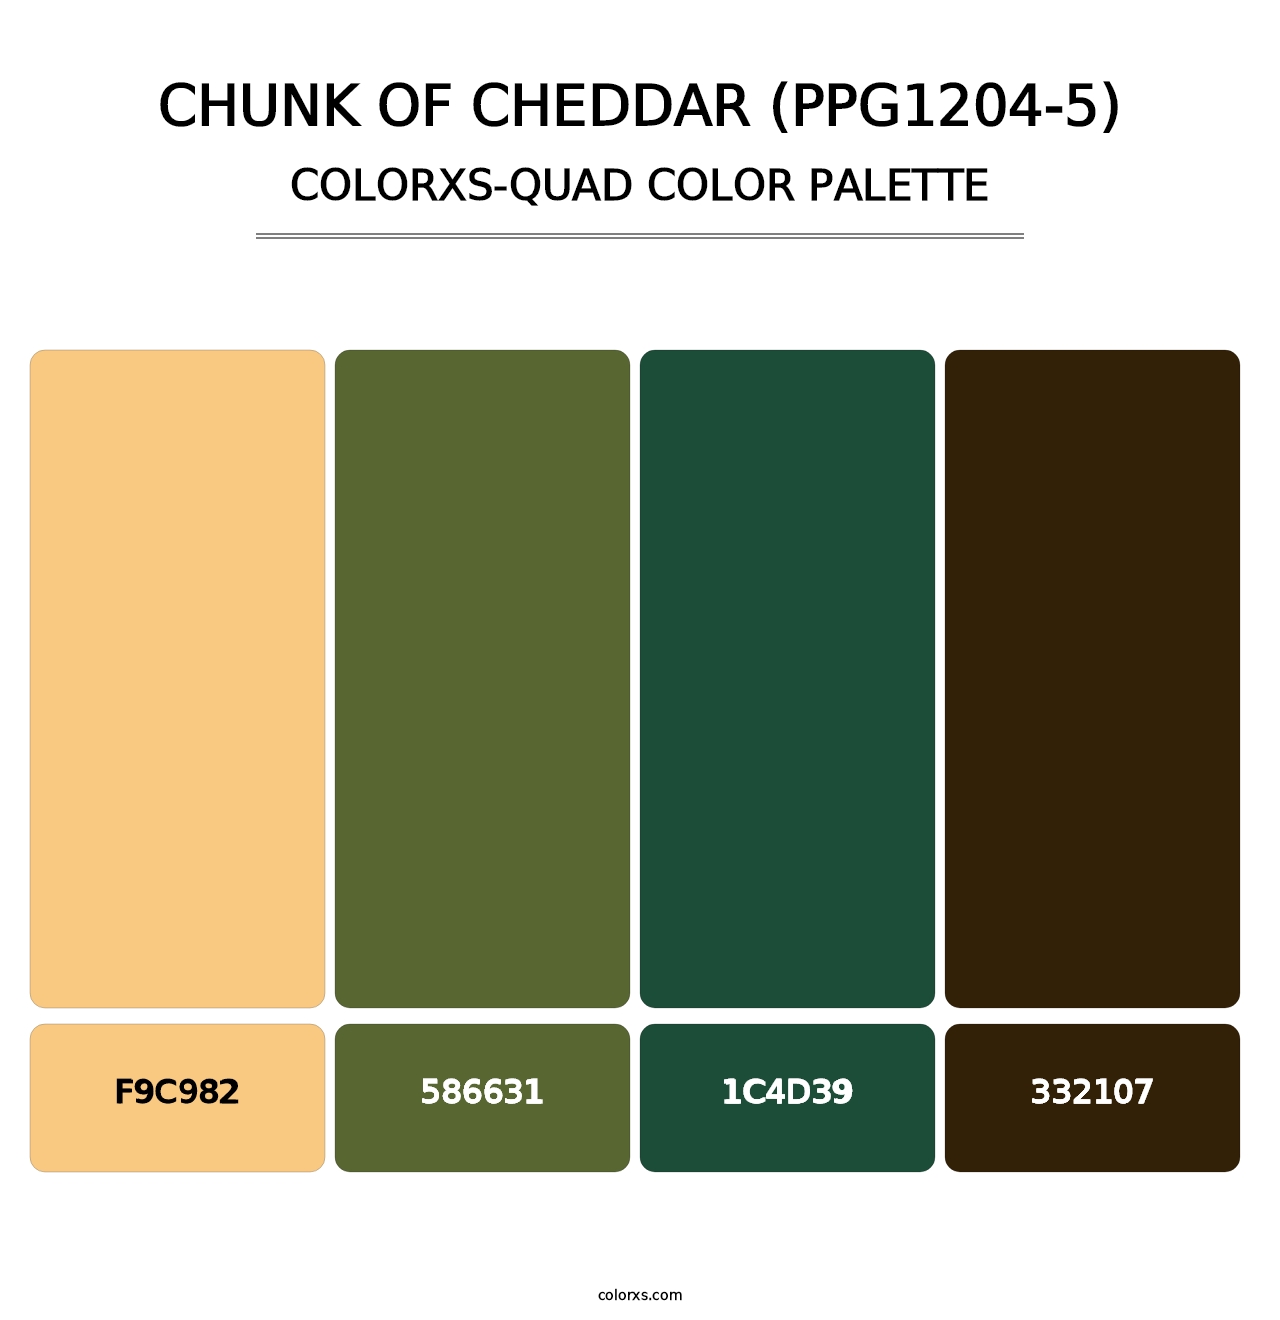 Chunk Of Cheddar (PPG1204-5) - Colorxs Quad Palette